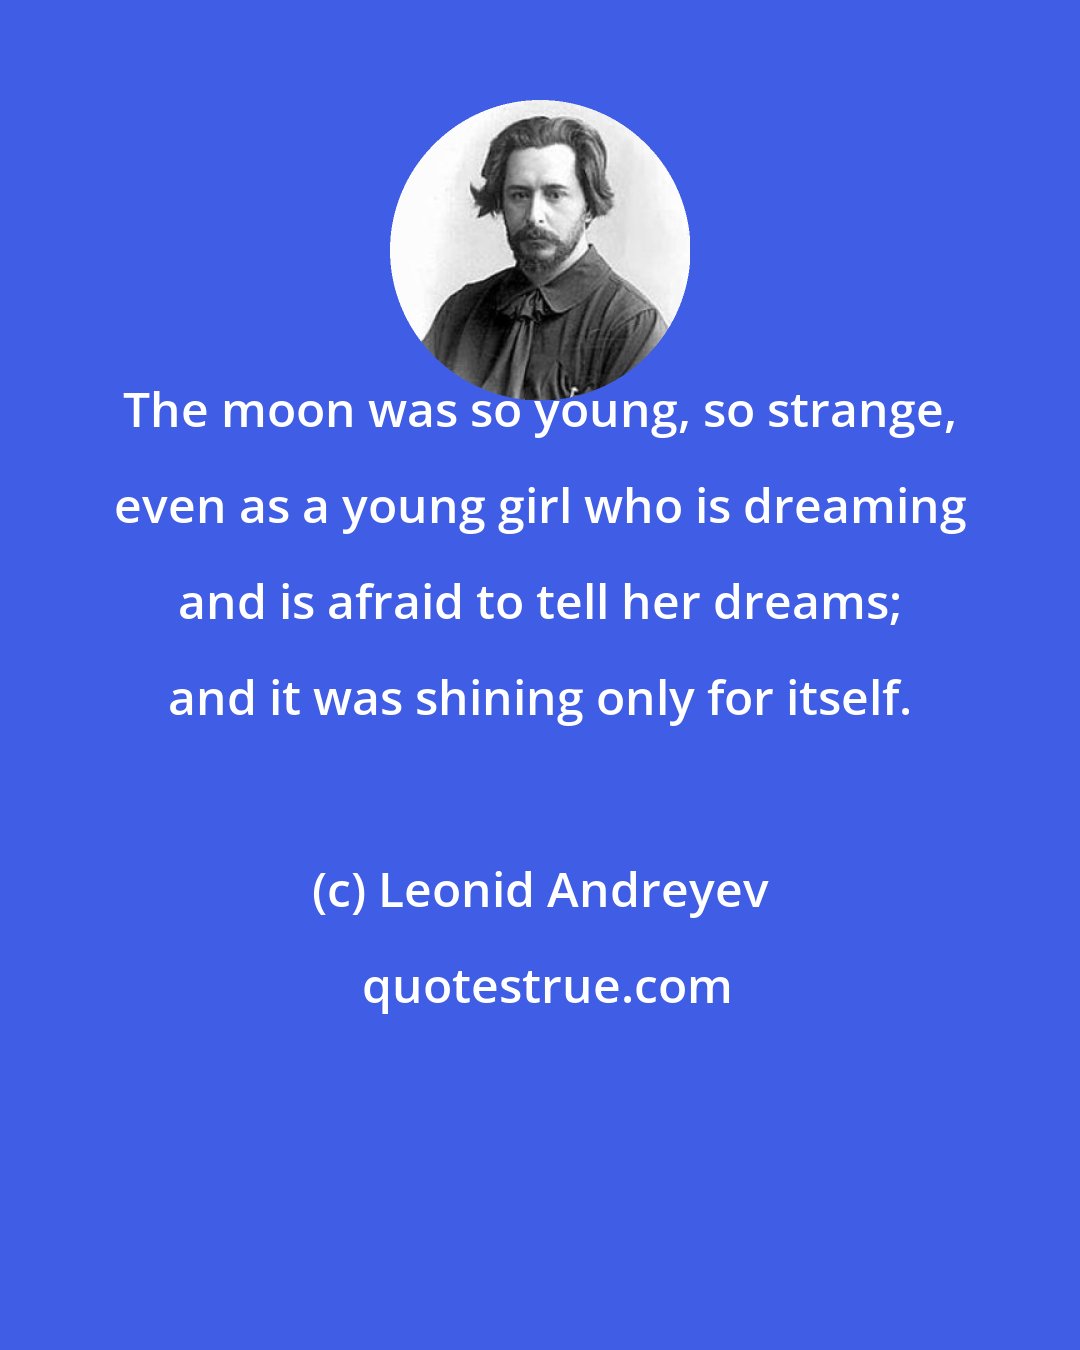 Leonid Andreyev: The moon was so young, so strange, even as a young girl who is dreaming and is afraid to tell her dreams; and it was shining only for itself.